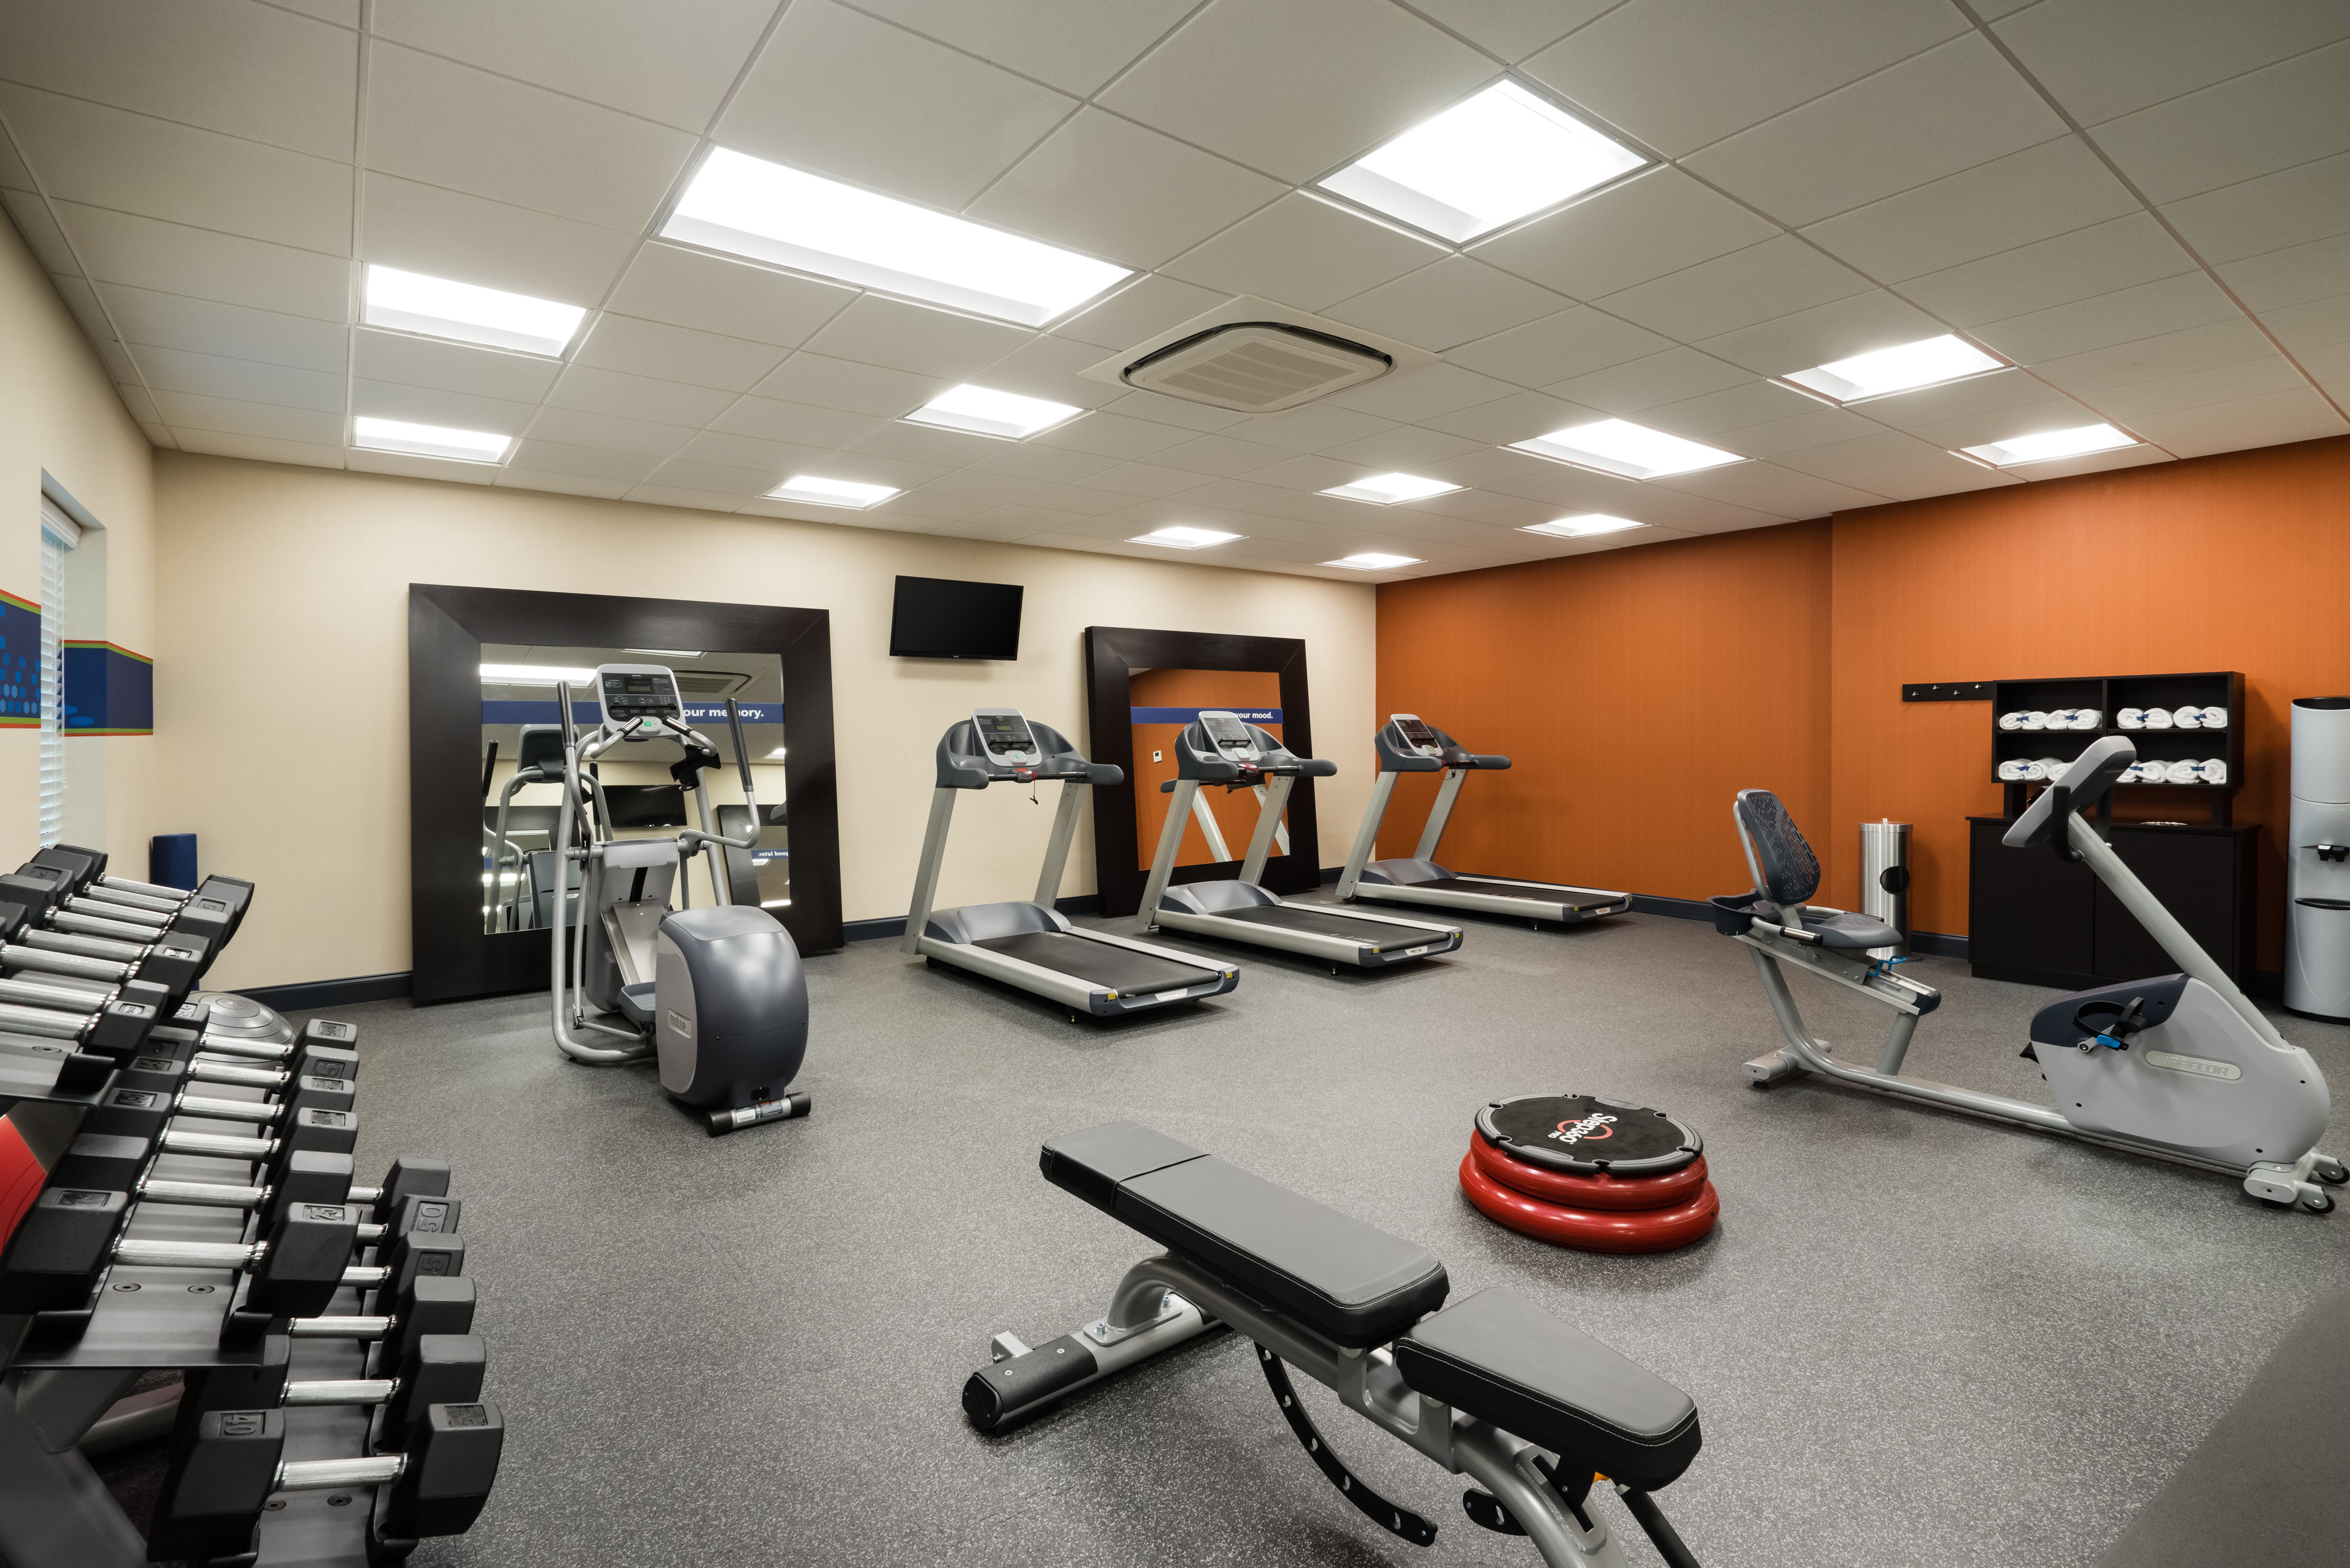 Fitness Center with Treadmills, Cross-Trainer, Dumbbell Rack, Weight Bench and Cycle Machine